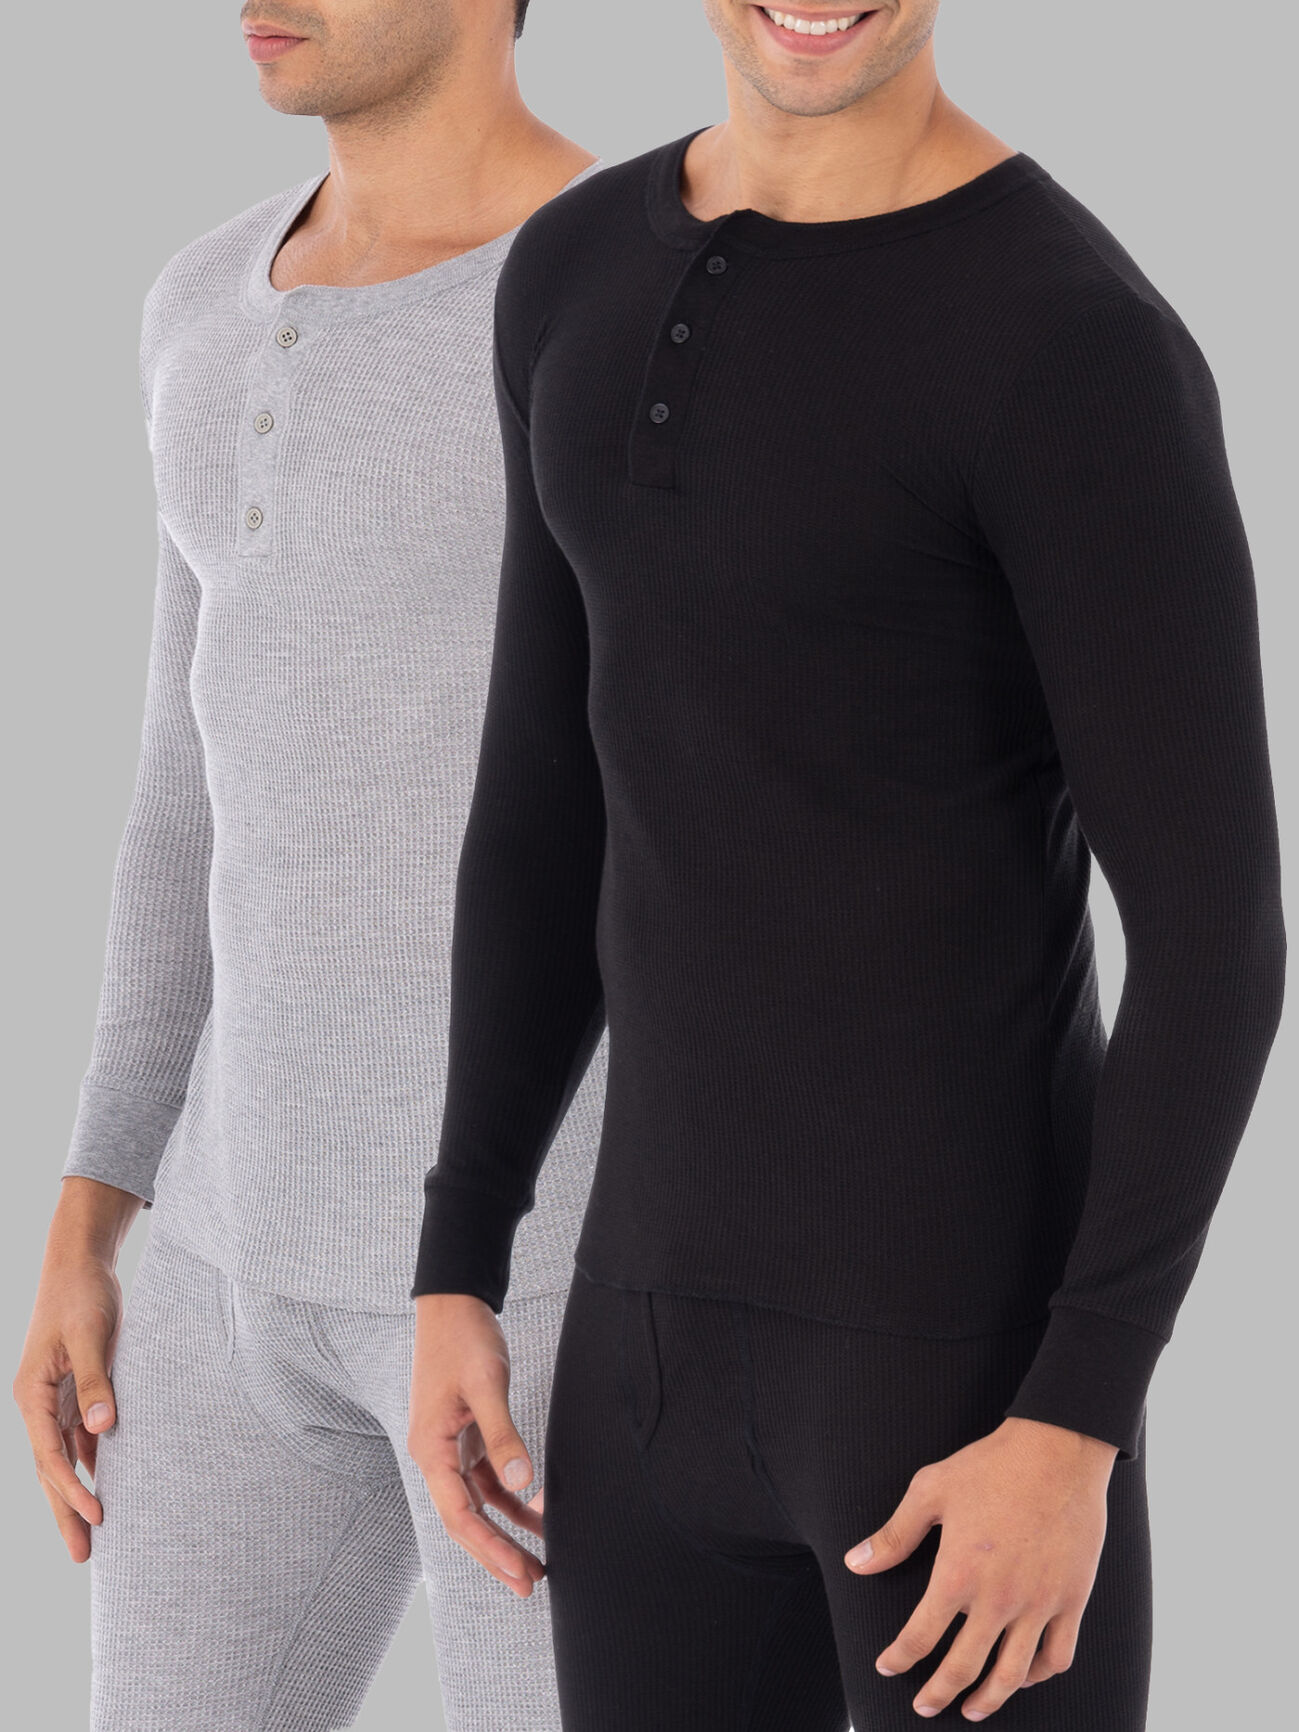 Top Global Thermal Wear Brands — Find Men's Thermals Nearby!, by body care